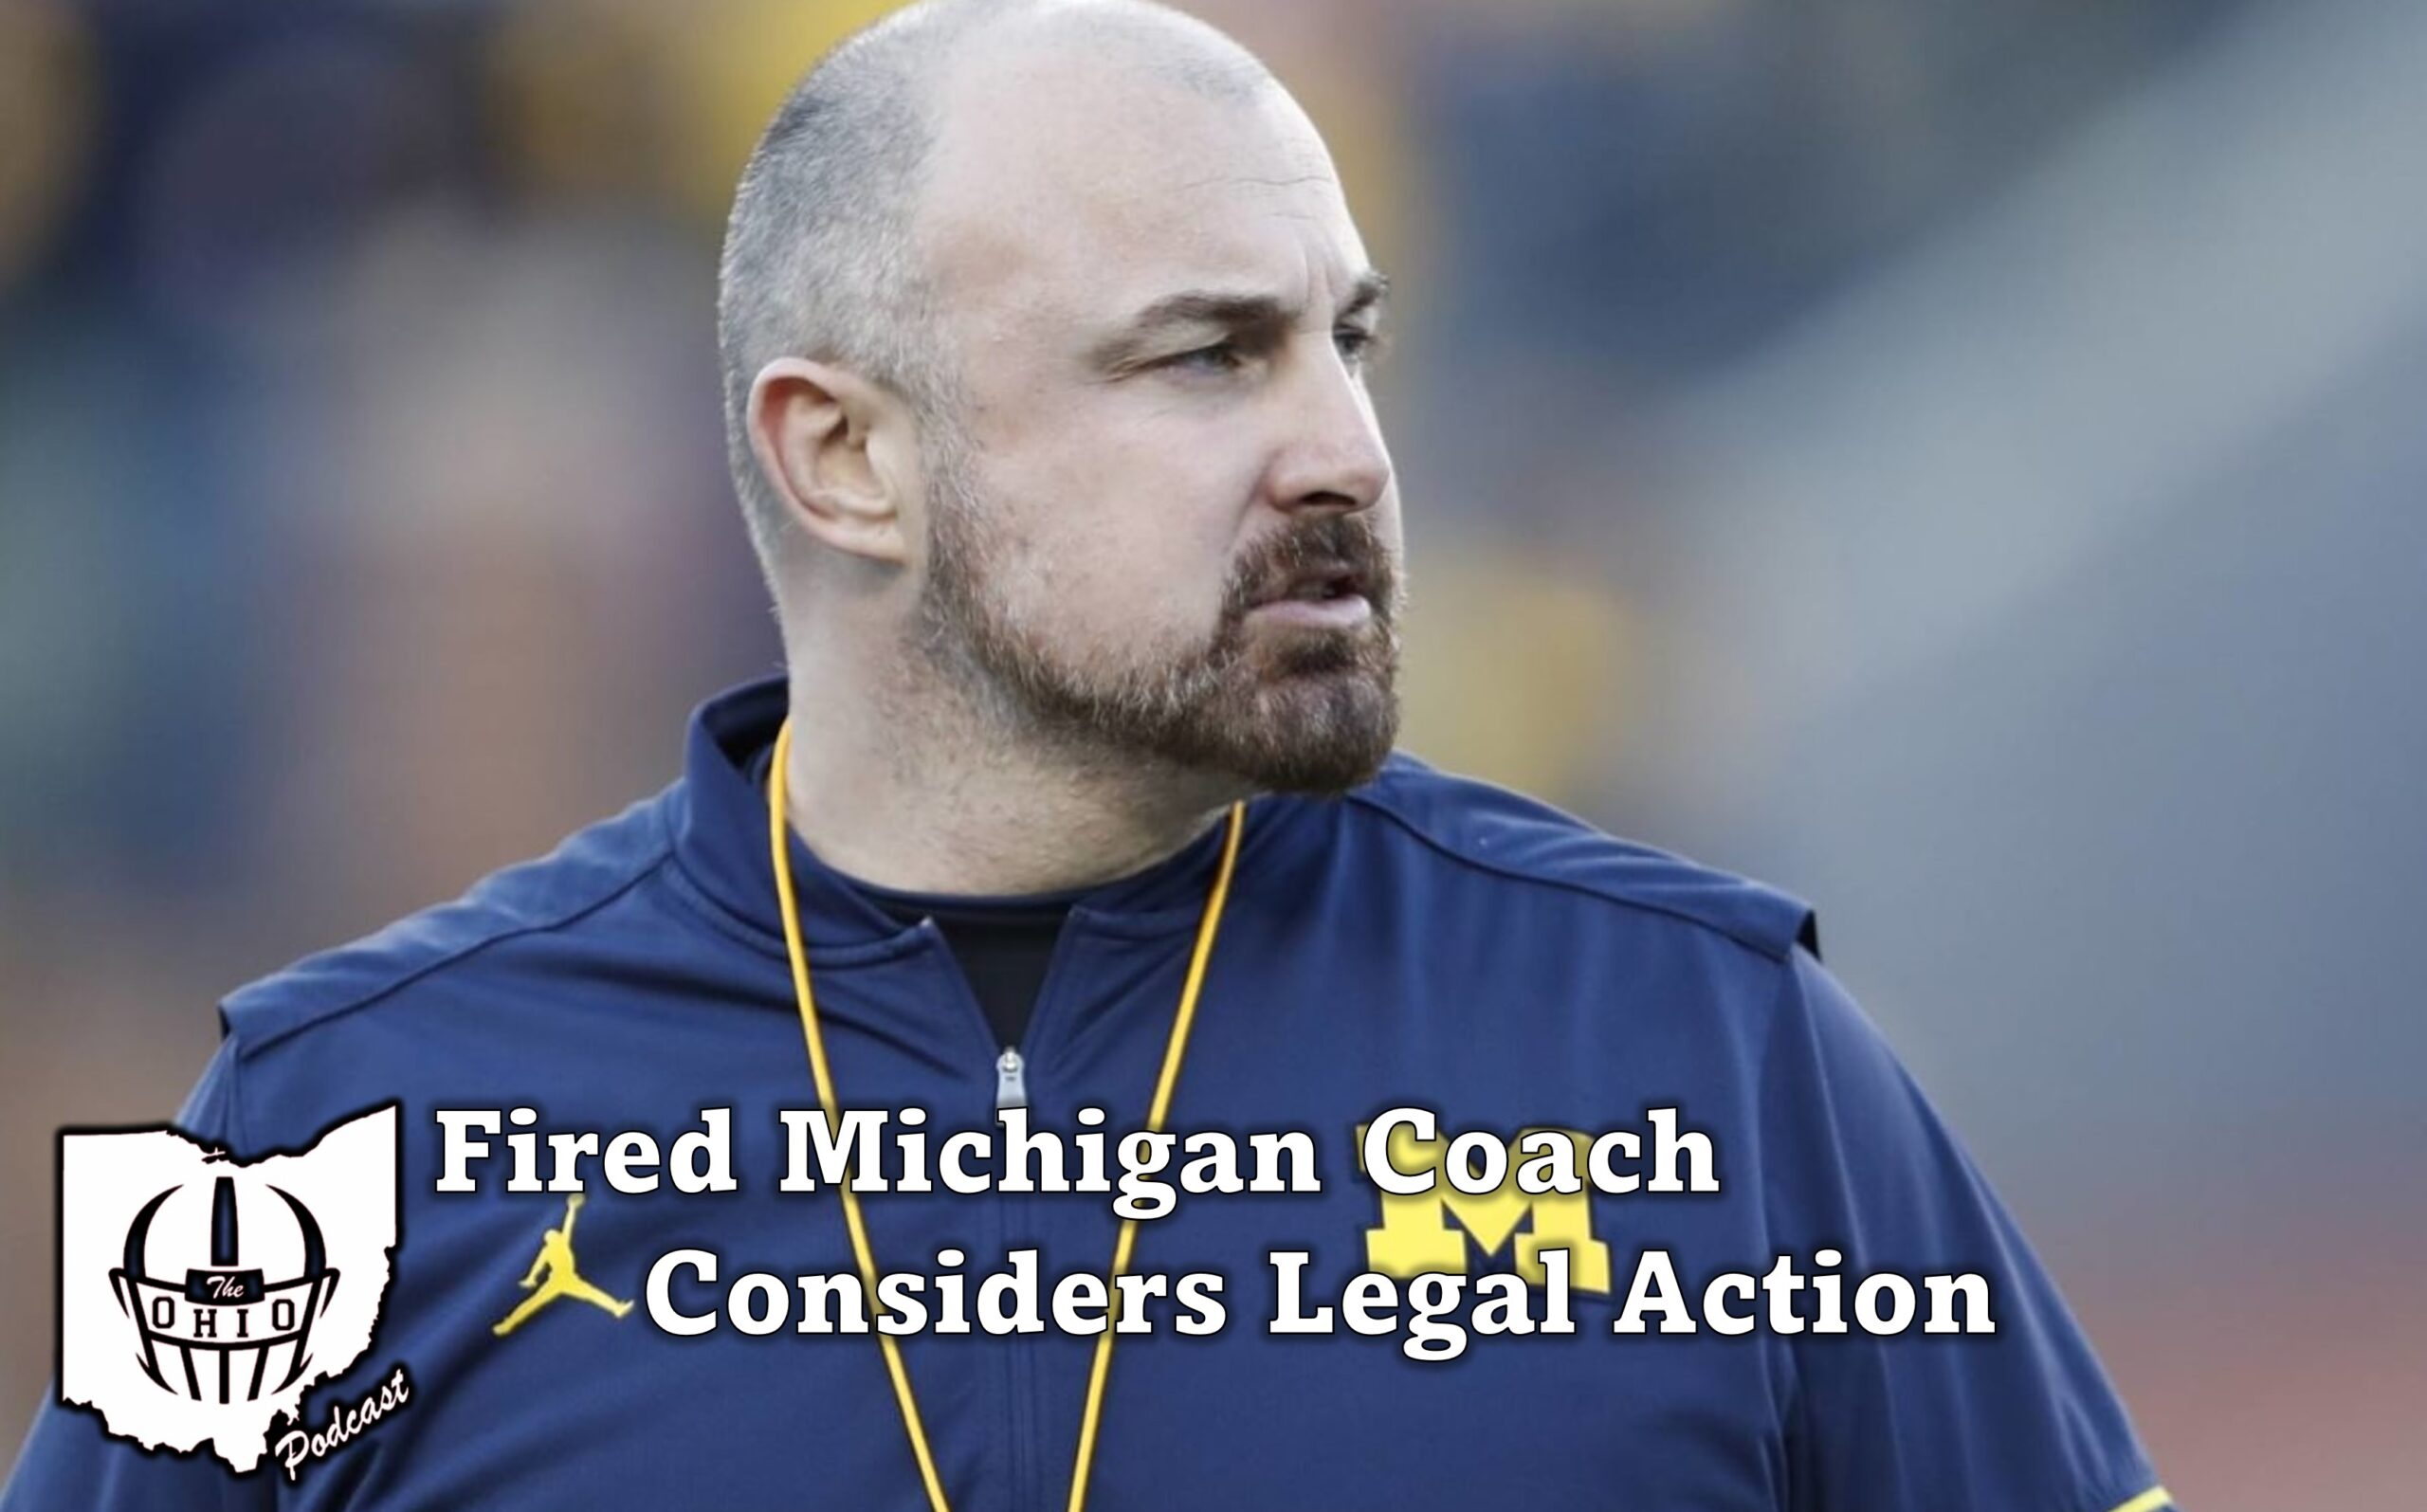 Fired Michigan Coach Considers Legal Action.